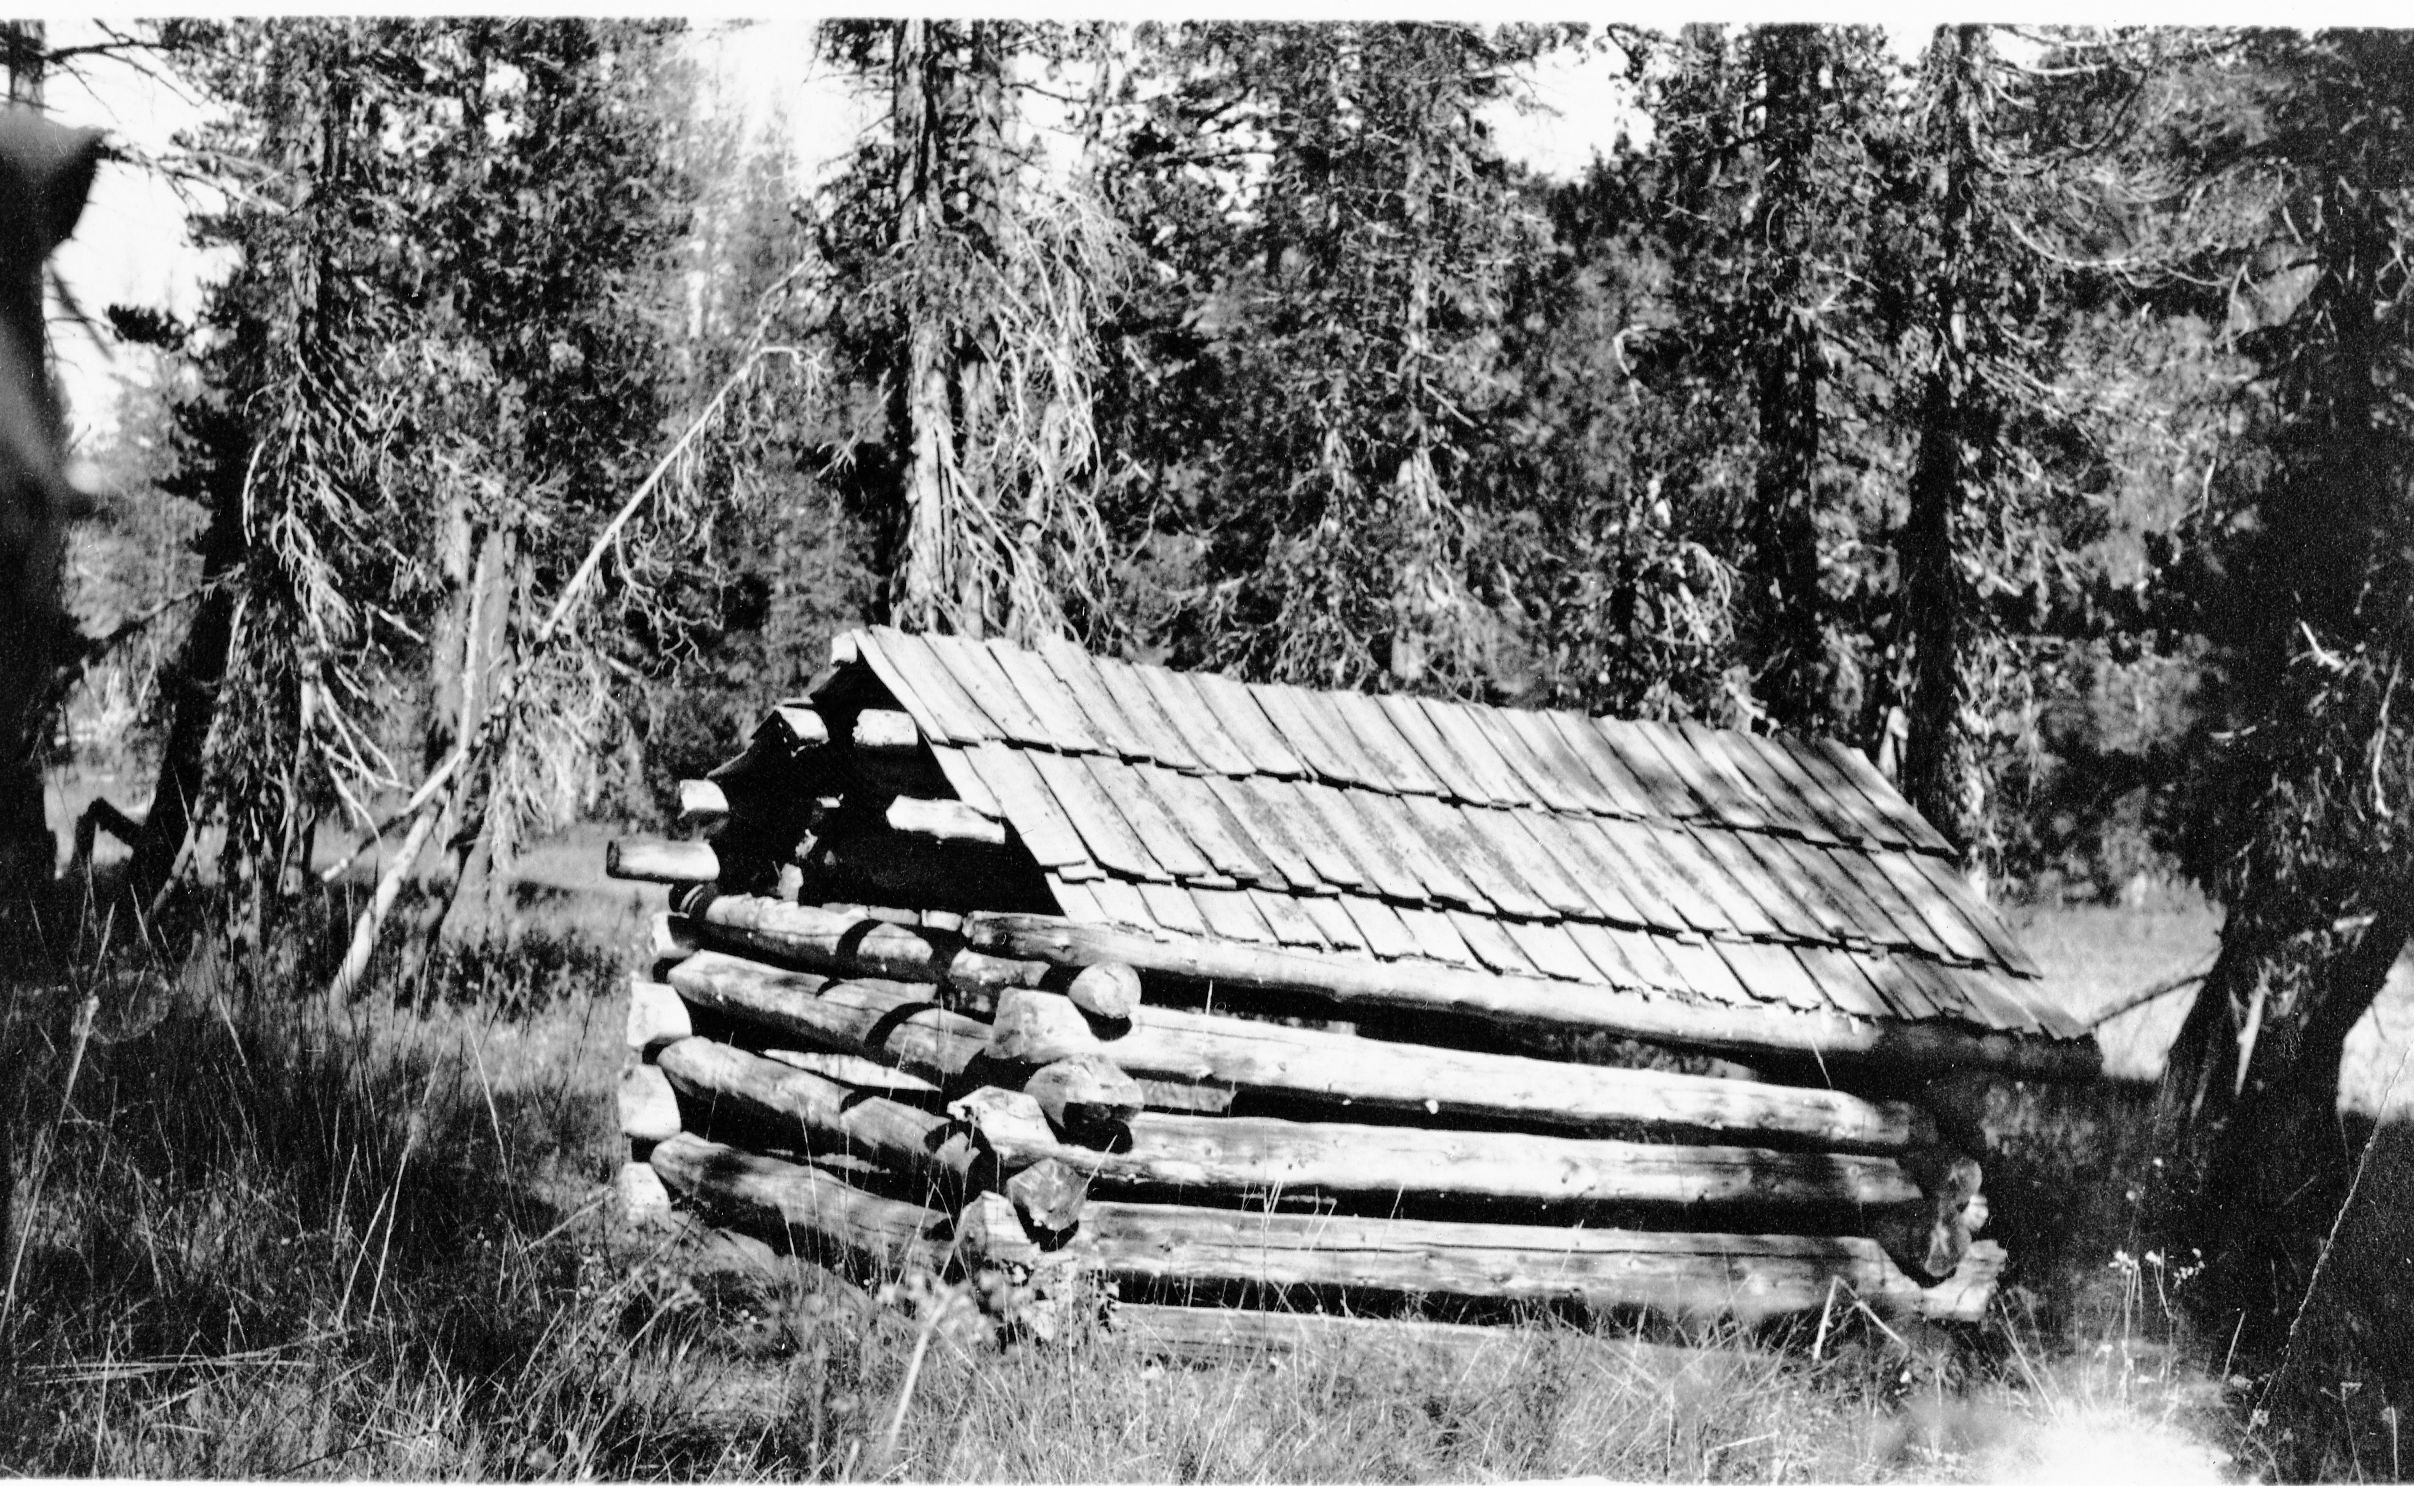 Tiltill Mountain cabin. Copy of photograph in YRL (979.447, Box Y-36, Tiltill Mtn. file). Written on the back of the original print is "Sheep herders cabin upper Tiltill Meadows." Jim Snyder, park historian (February 1992) believes it is the lower Tiltill Mountain cabin which no longer exists. It was in the first meadow at the top of Tiltill Mtn. as you go uphill from Tiltill Valley. Copy Neg: 2/92, Mike Floyd